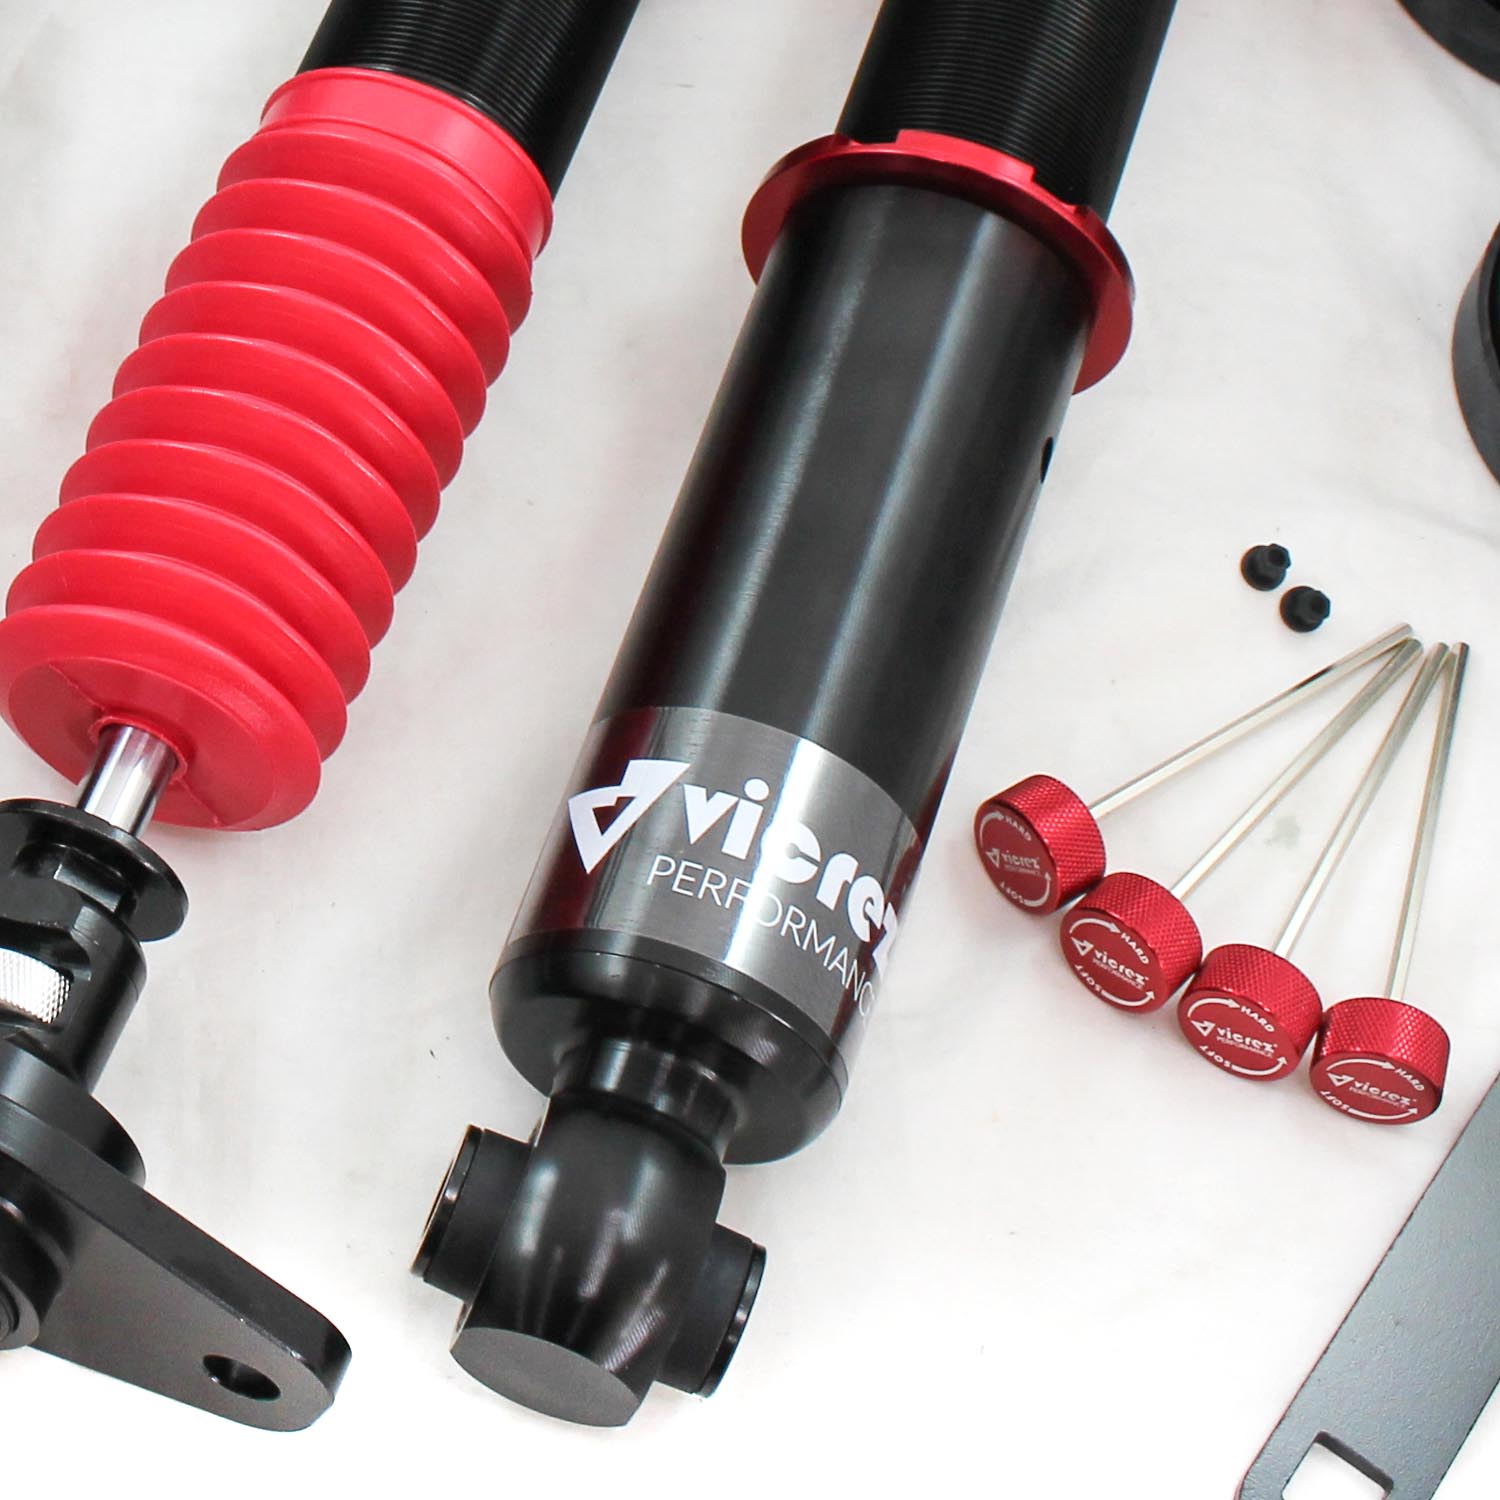 Complete Coilovers Suspension Kits for Ford Mustang Kenya